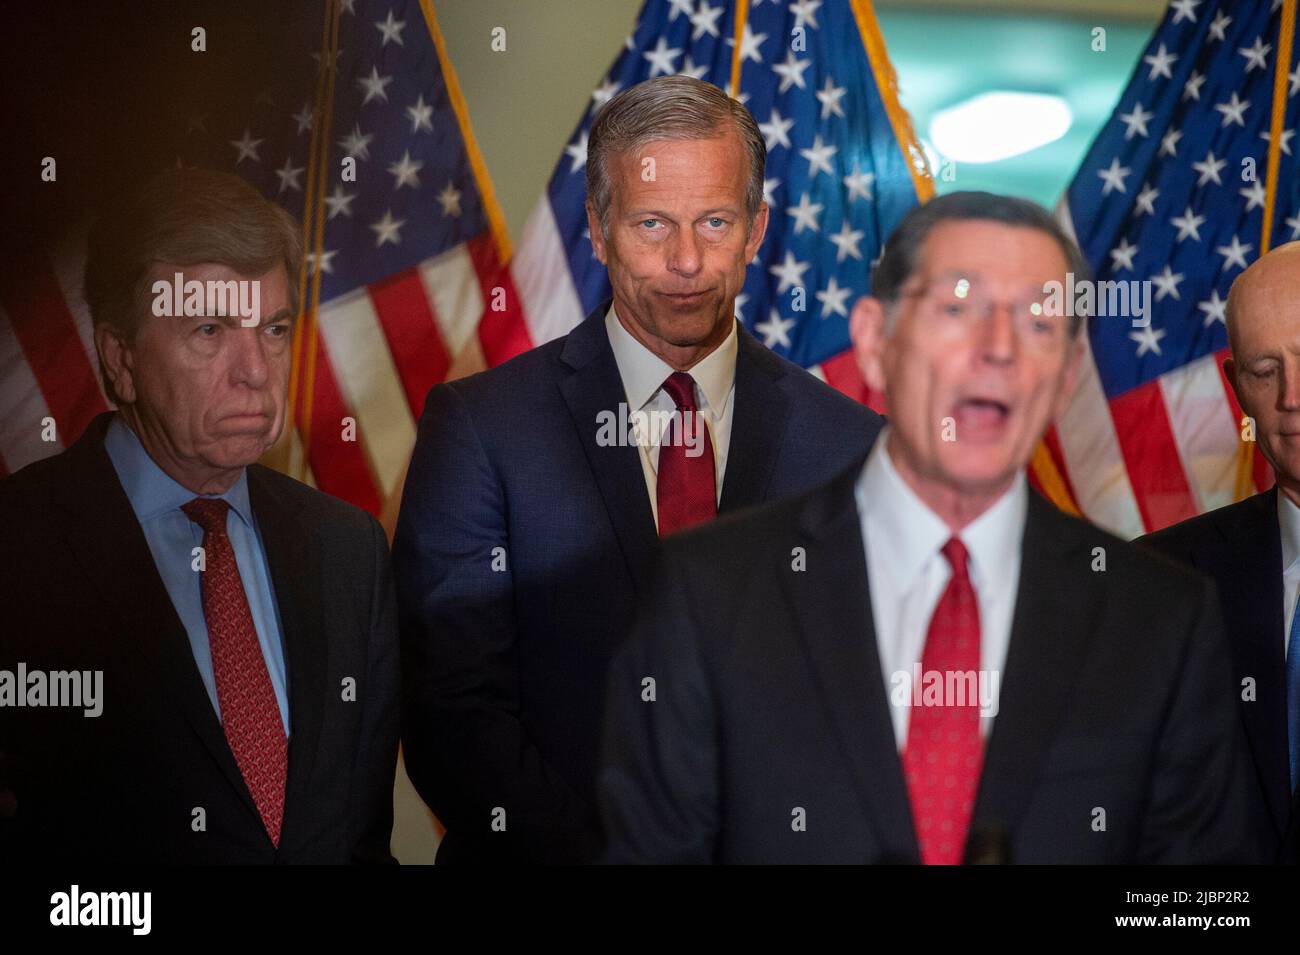 United States Senator Roy Blunt (Republican of Missouri), left, United States Senator John Thune (Republican of South Dakota), second from left, and United States Senator Rick Scott (Republican of Florida), right, listen as United States Senator John Barrasso (Republican of Wyoming) offers remarks during the Senate Republicanâs policy luncheon press conference, at the US Capitol in Washington, DC, Tuesday, June 7, 2022. Credit: Rod Lamkey/CNP Stock Photo